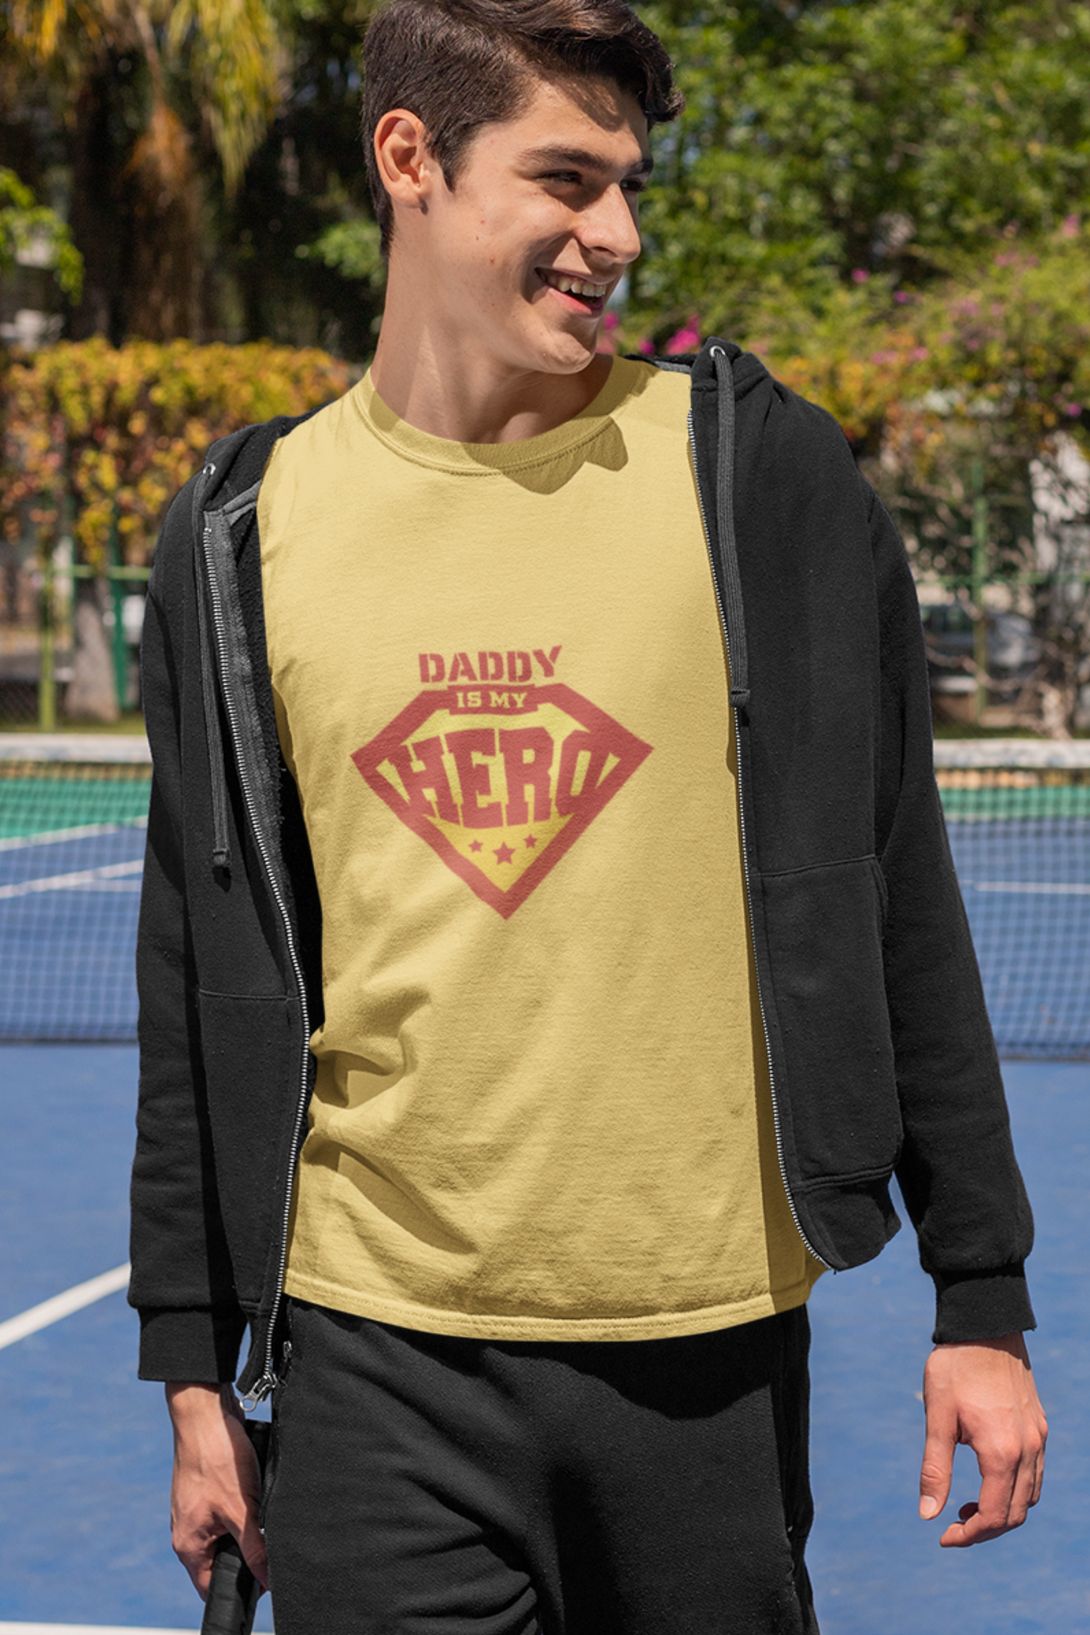 Daddy Is My Hero Printed T-Shirt For Men - WowWaves - 5